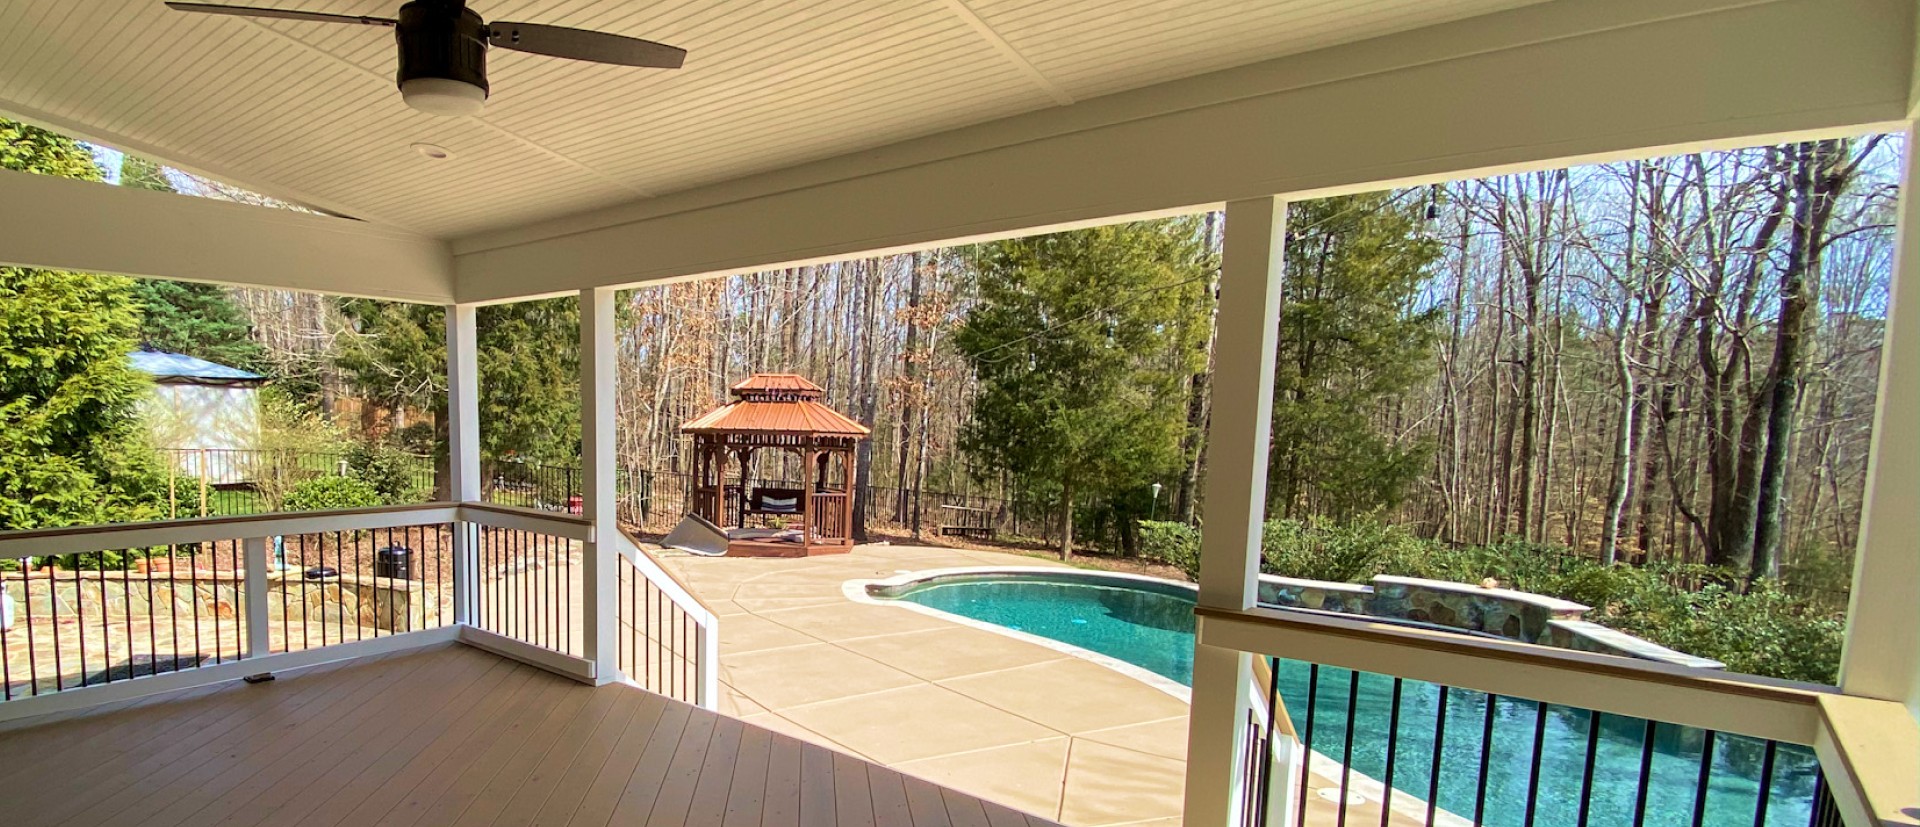 view of a paved backyard, pergola, and pool from deck